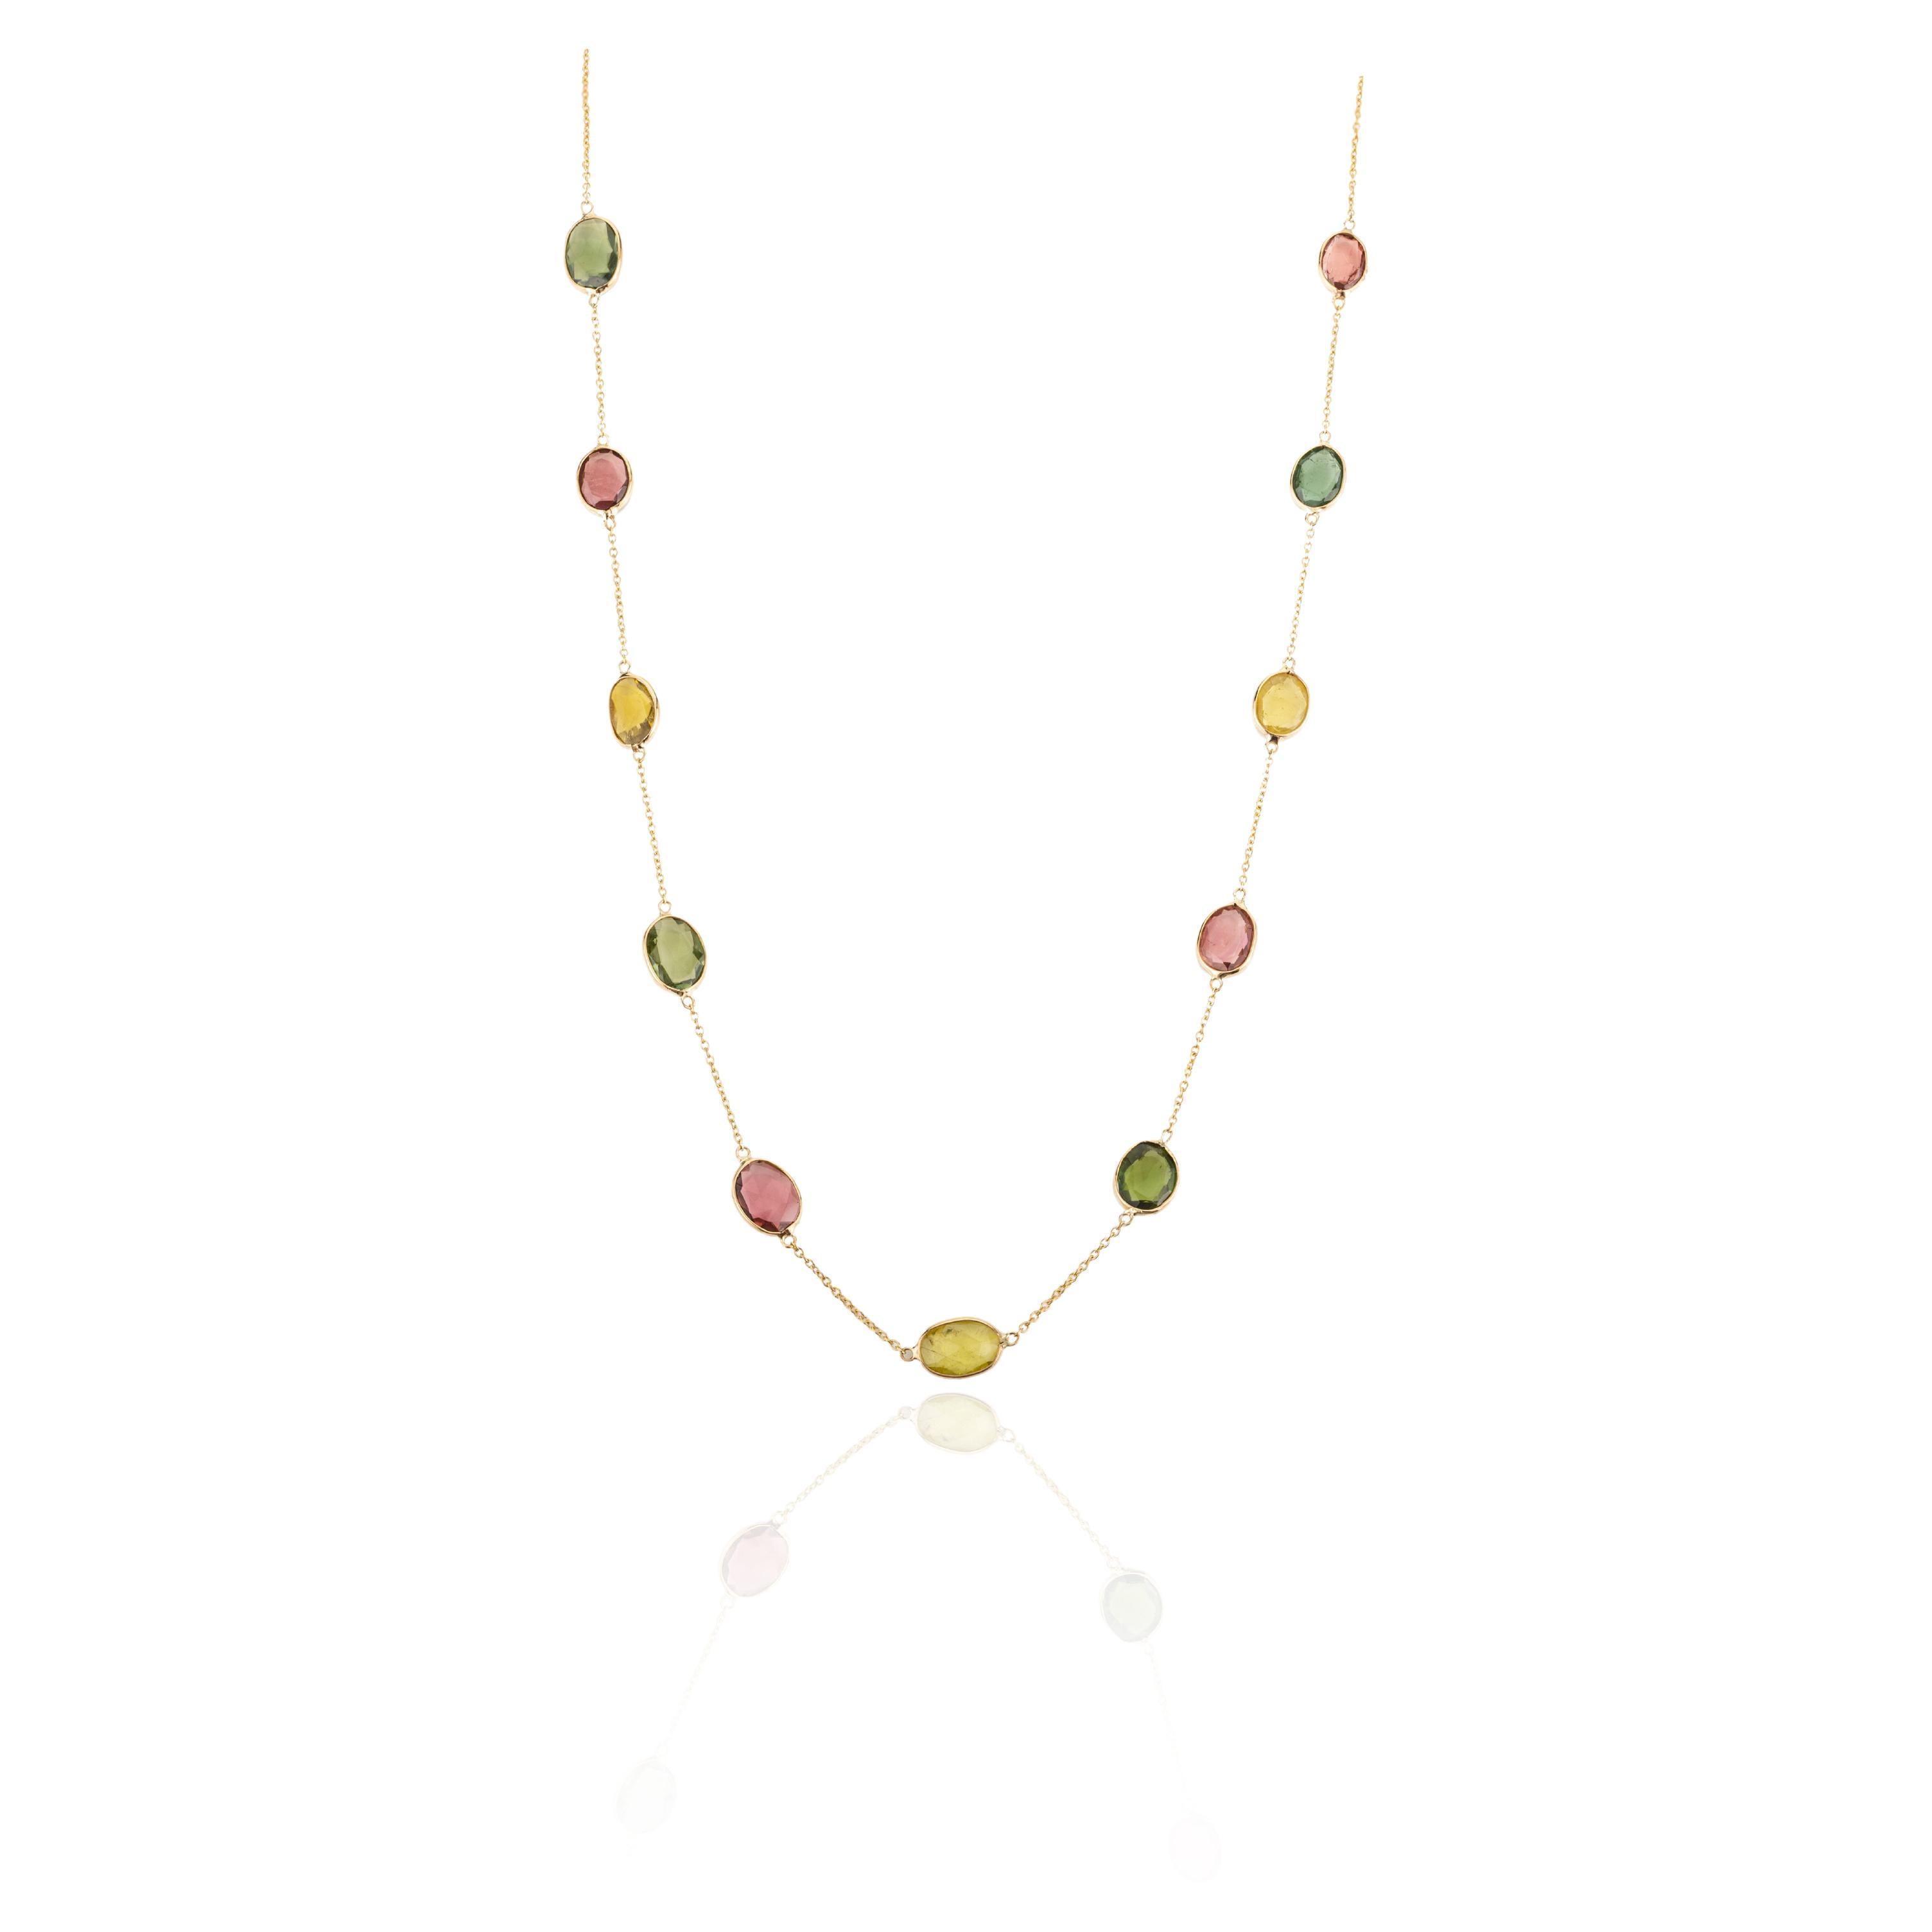 8.25 Carat Natural Tourmaline Station Chain Necklace in 18k Yellow Gold for Mom For Sale